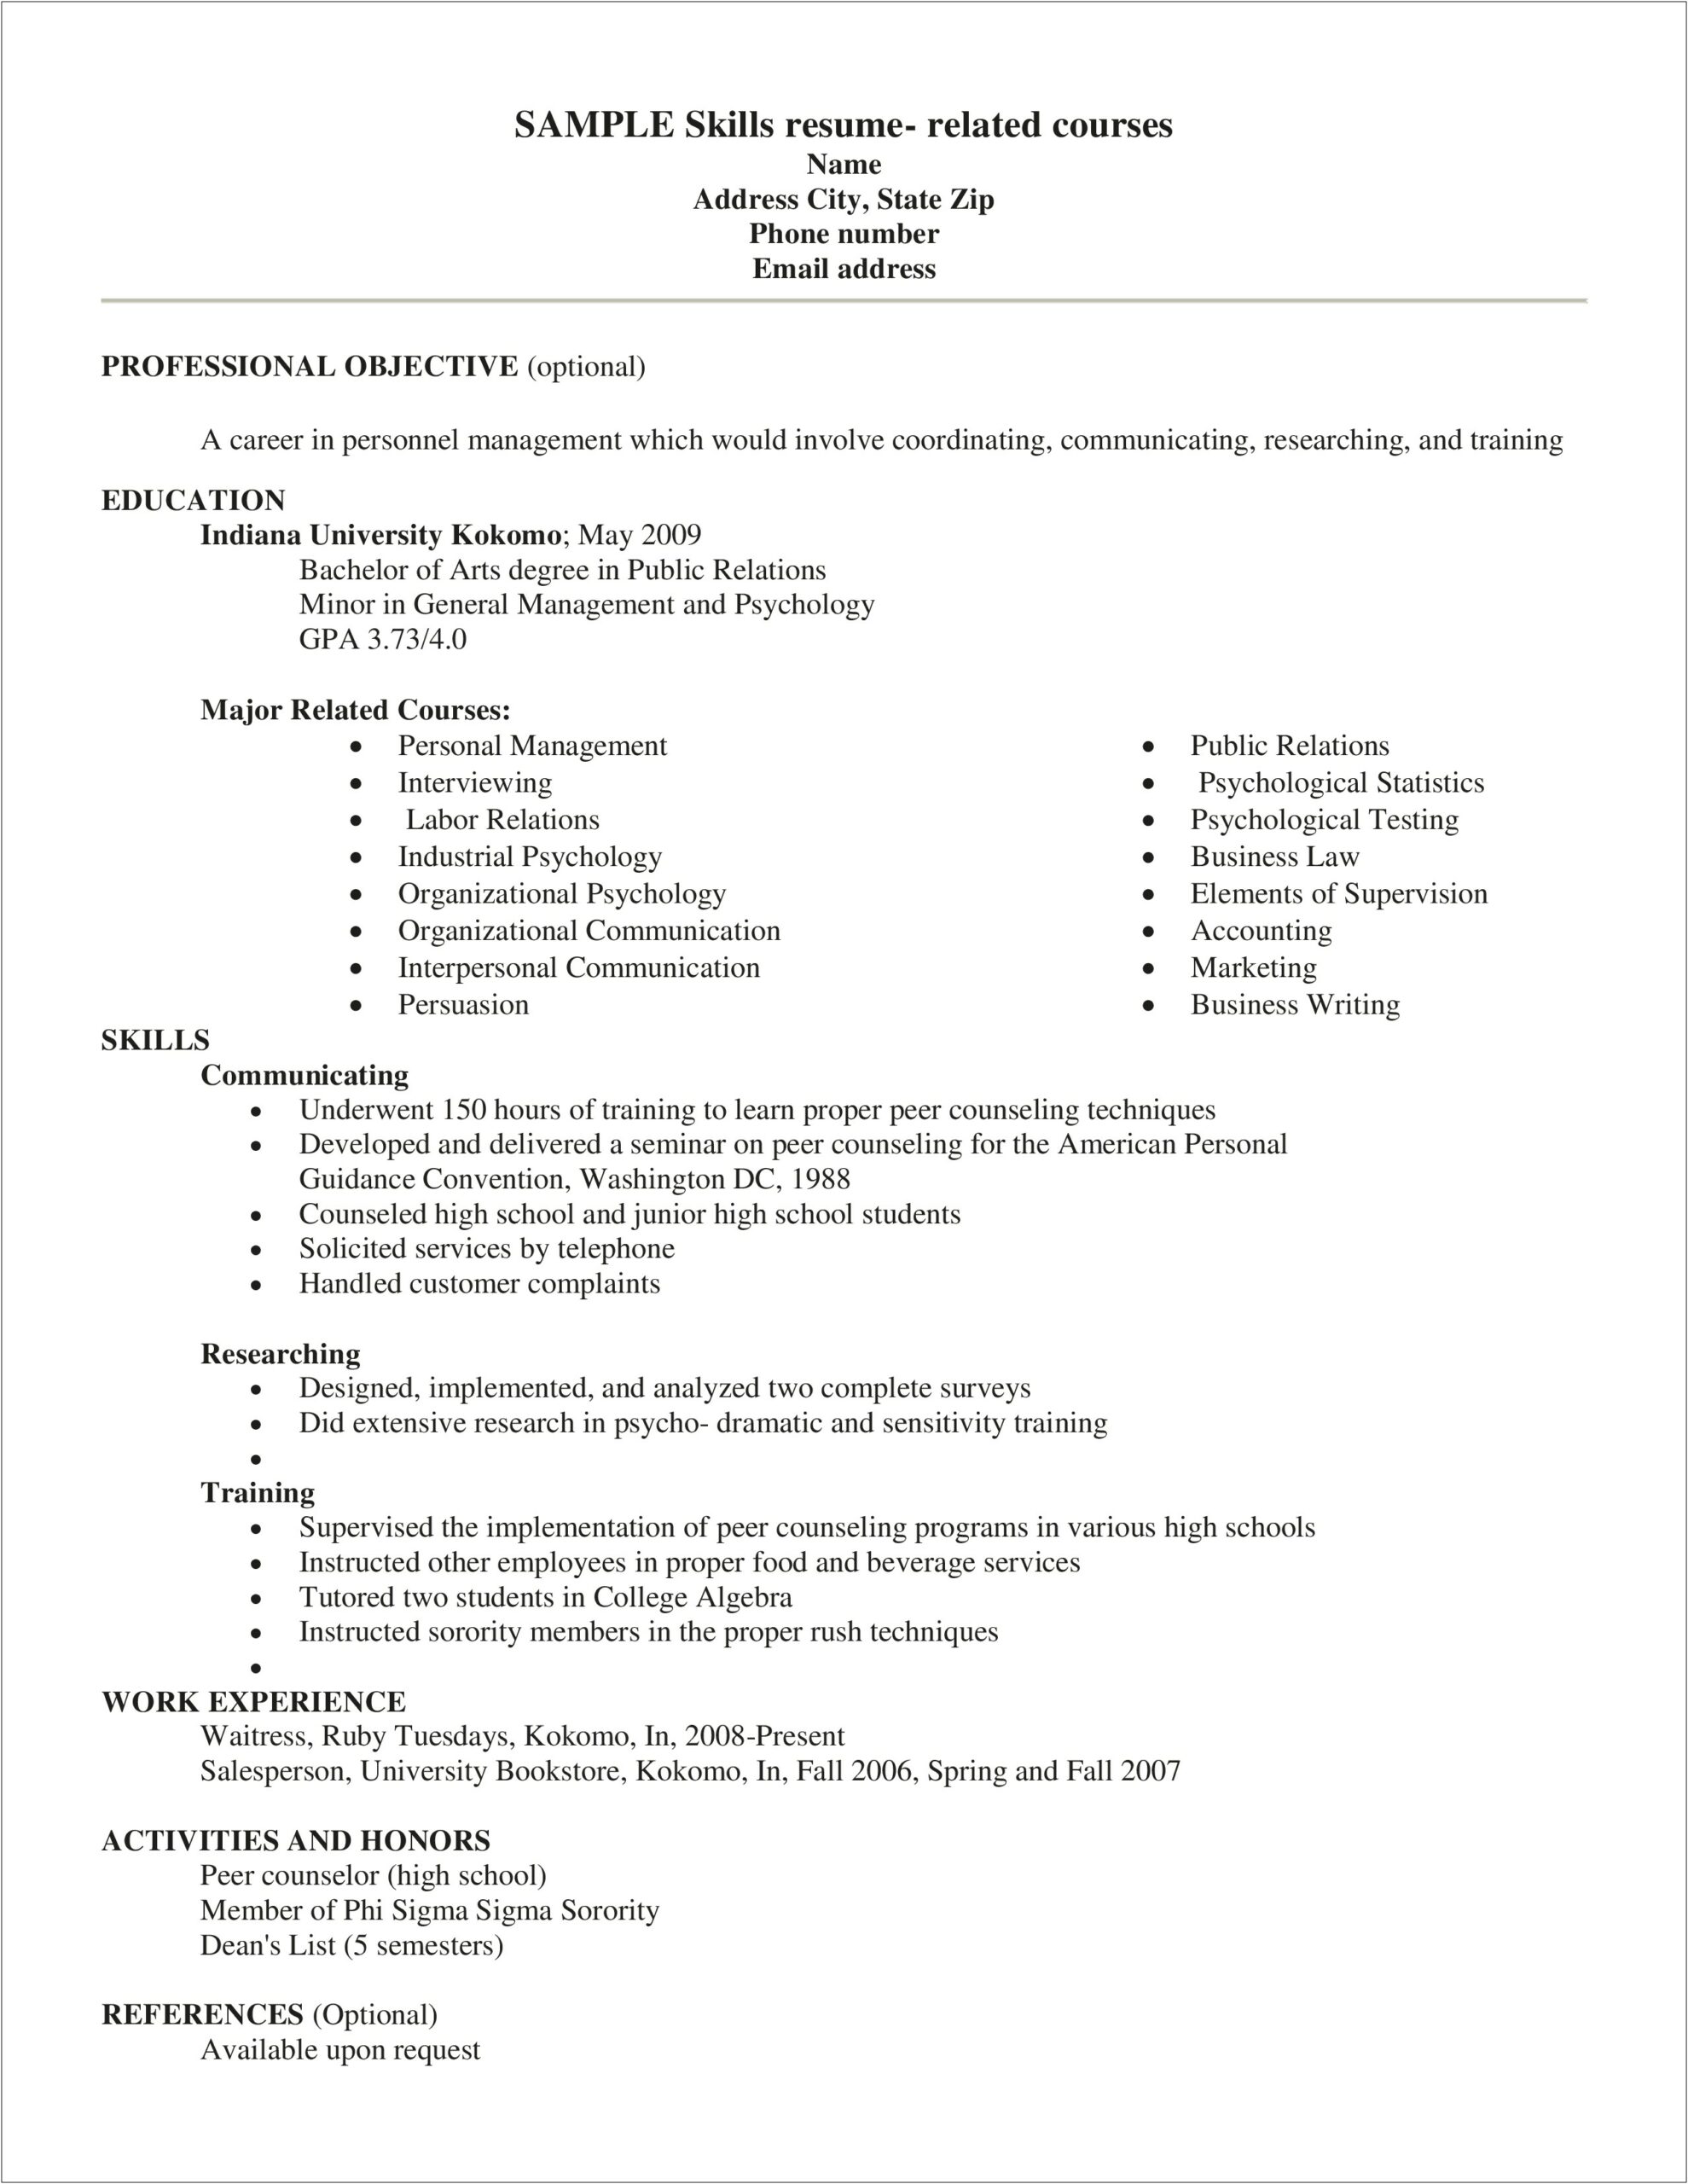 Listing School Cousneling Certification On Resume